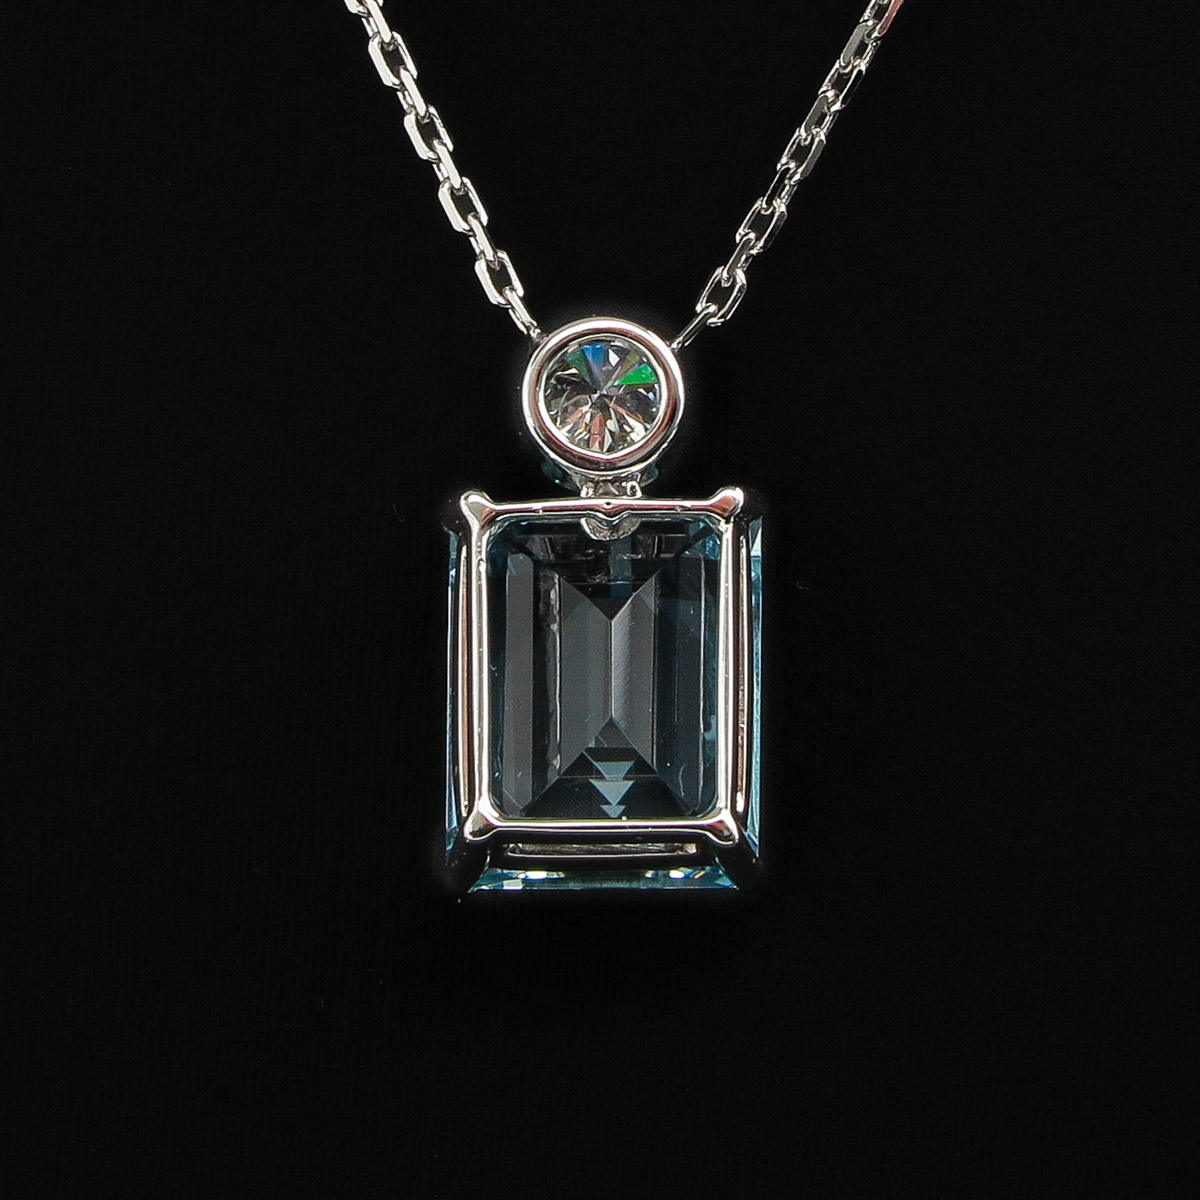 A Necklace with Emerald Cut Aquamarine and Diamond Pendant - Image 3 of 6